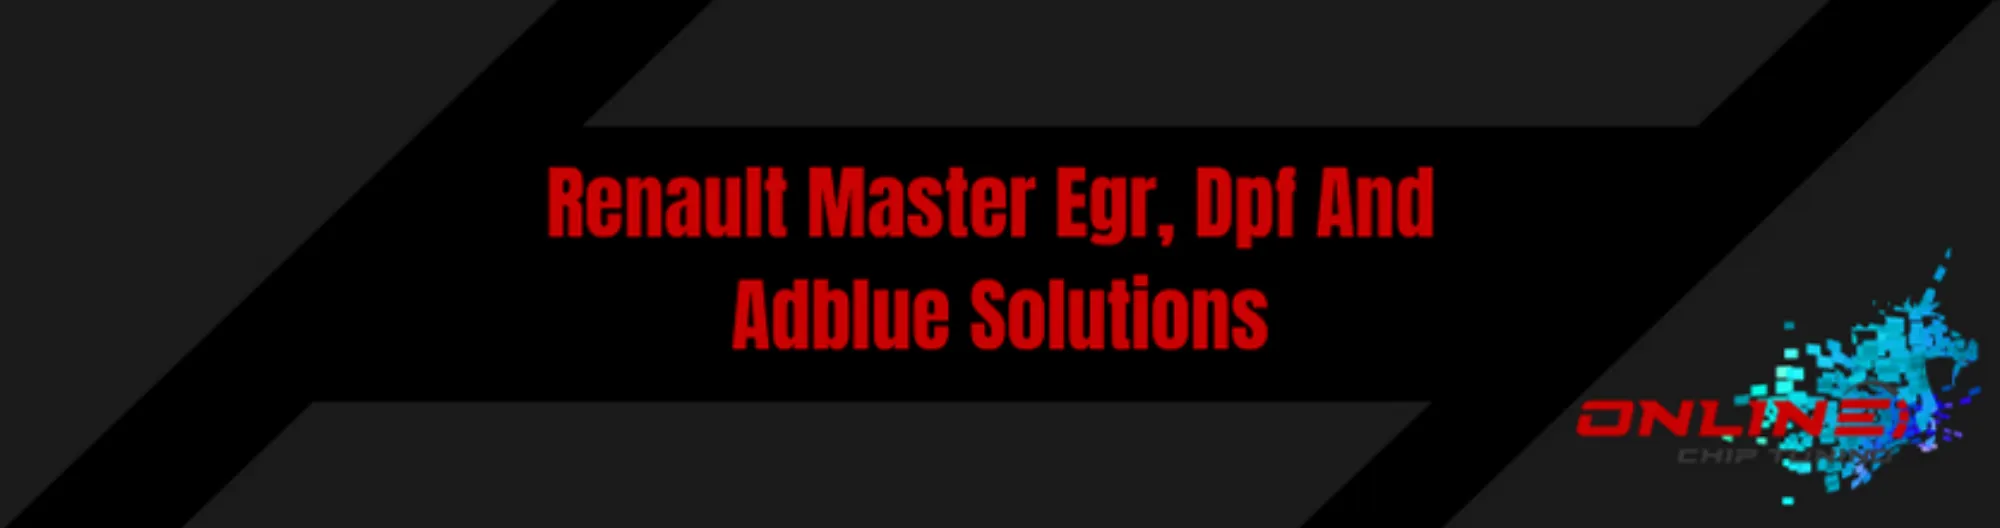 Renault Master Egr, Dpf And Adblue Solutions